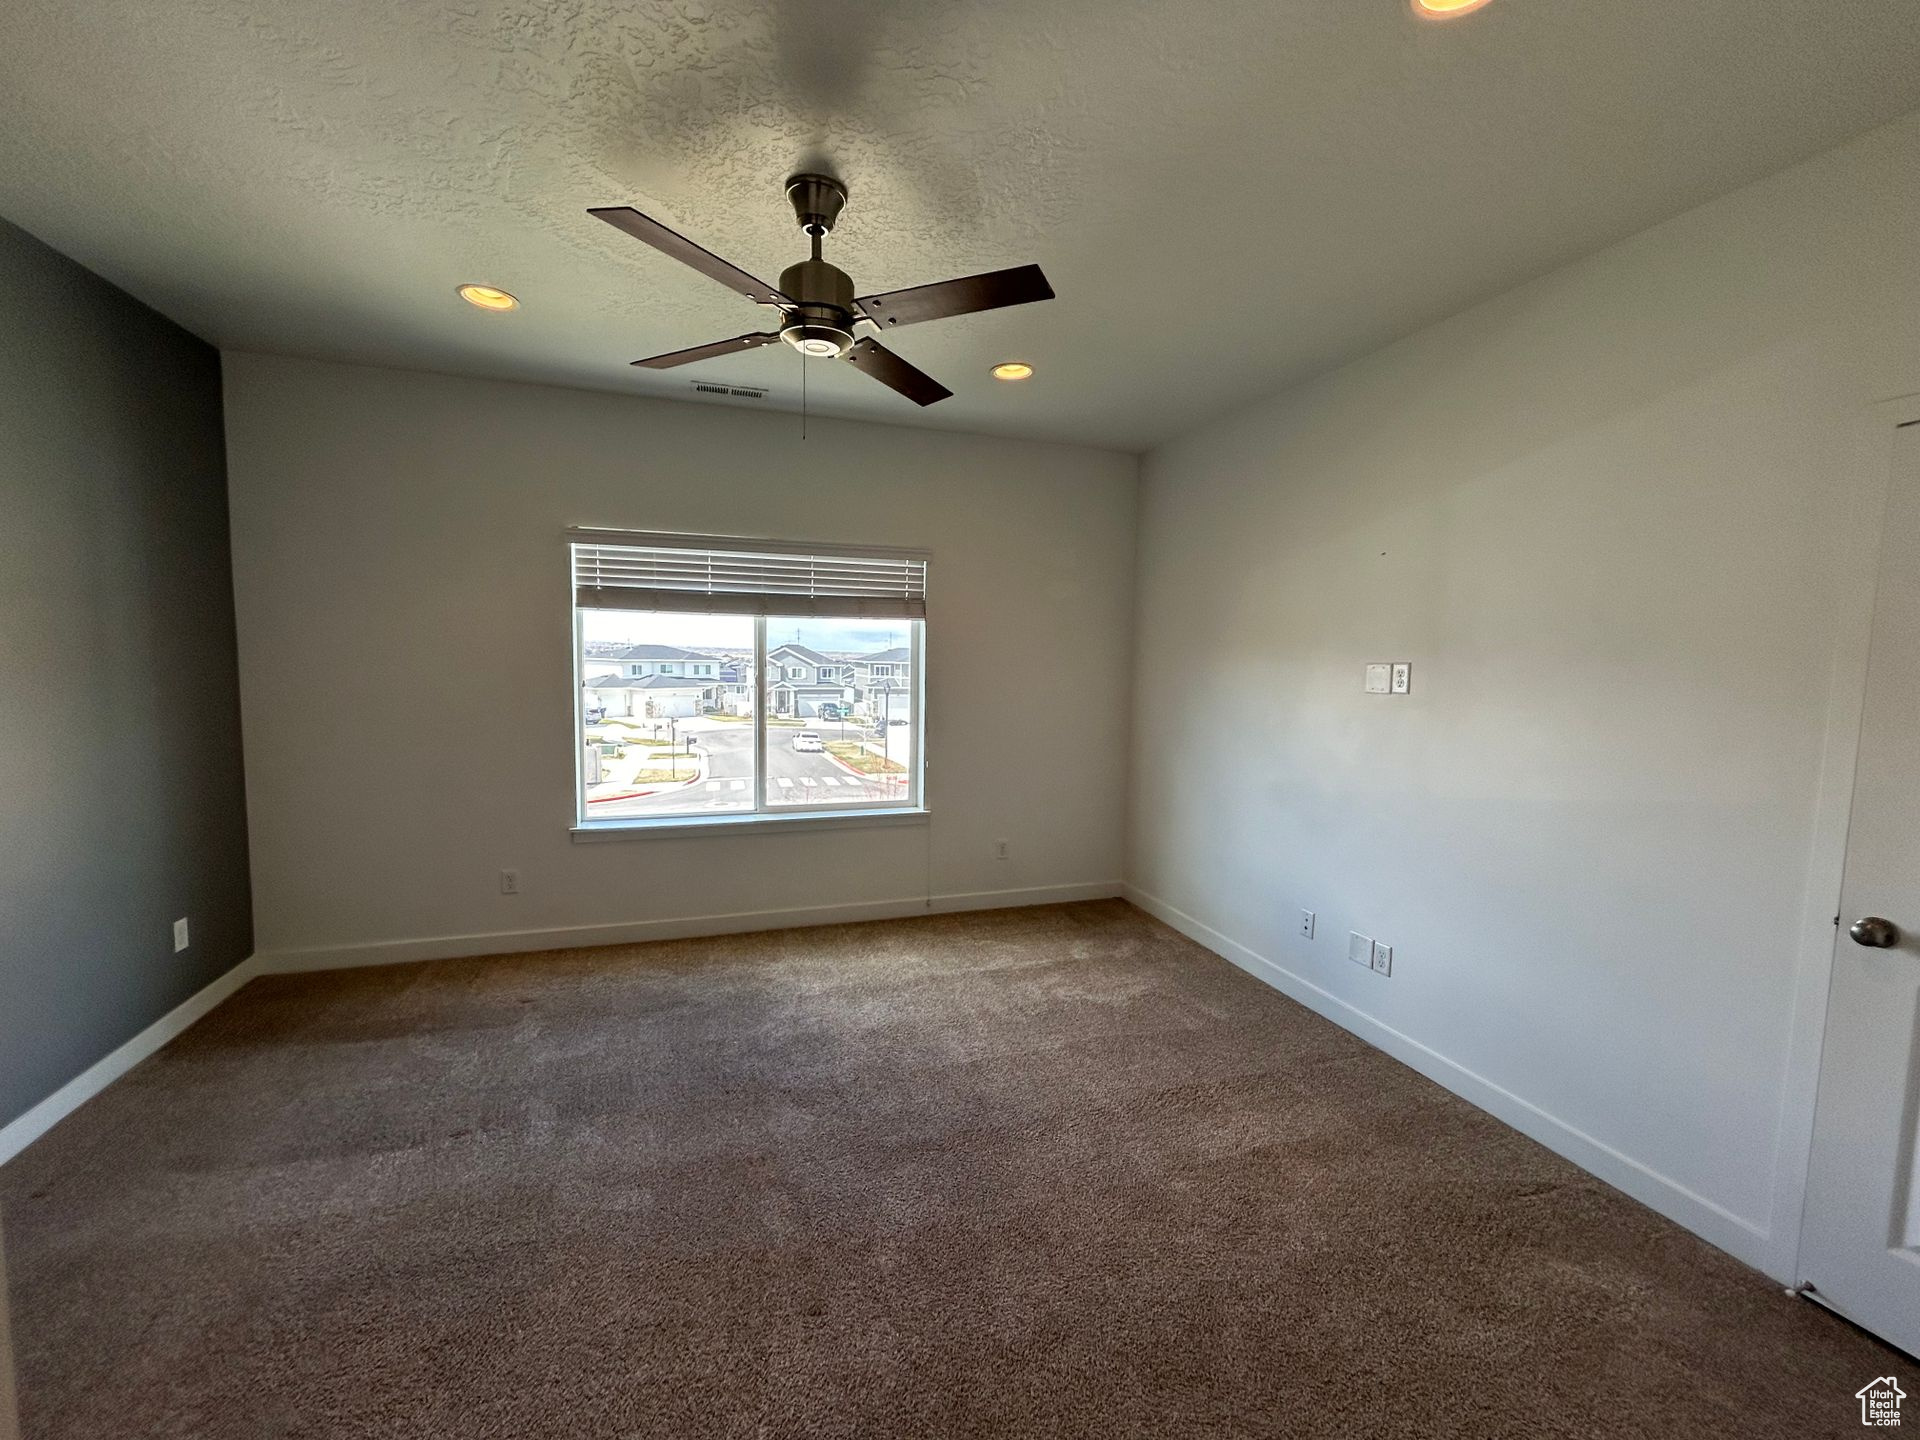 Spare room featuring a textured ceiling, dark colored carpet, and ceiling fan